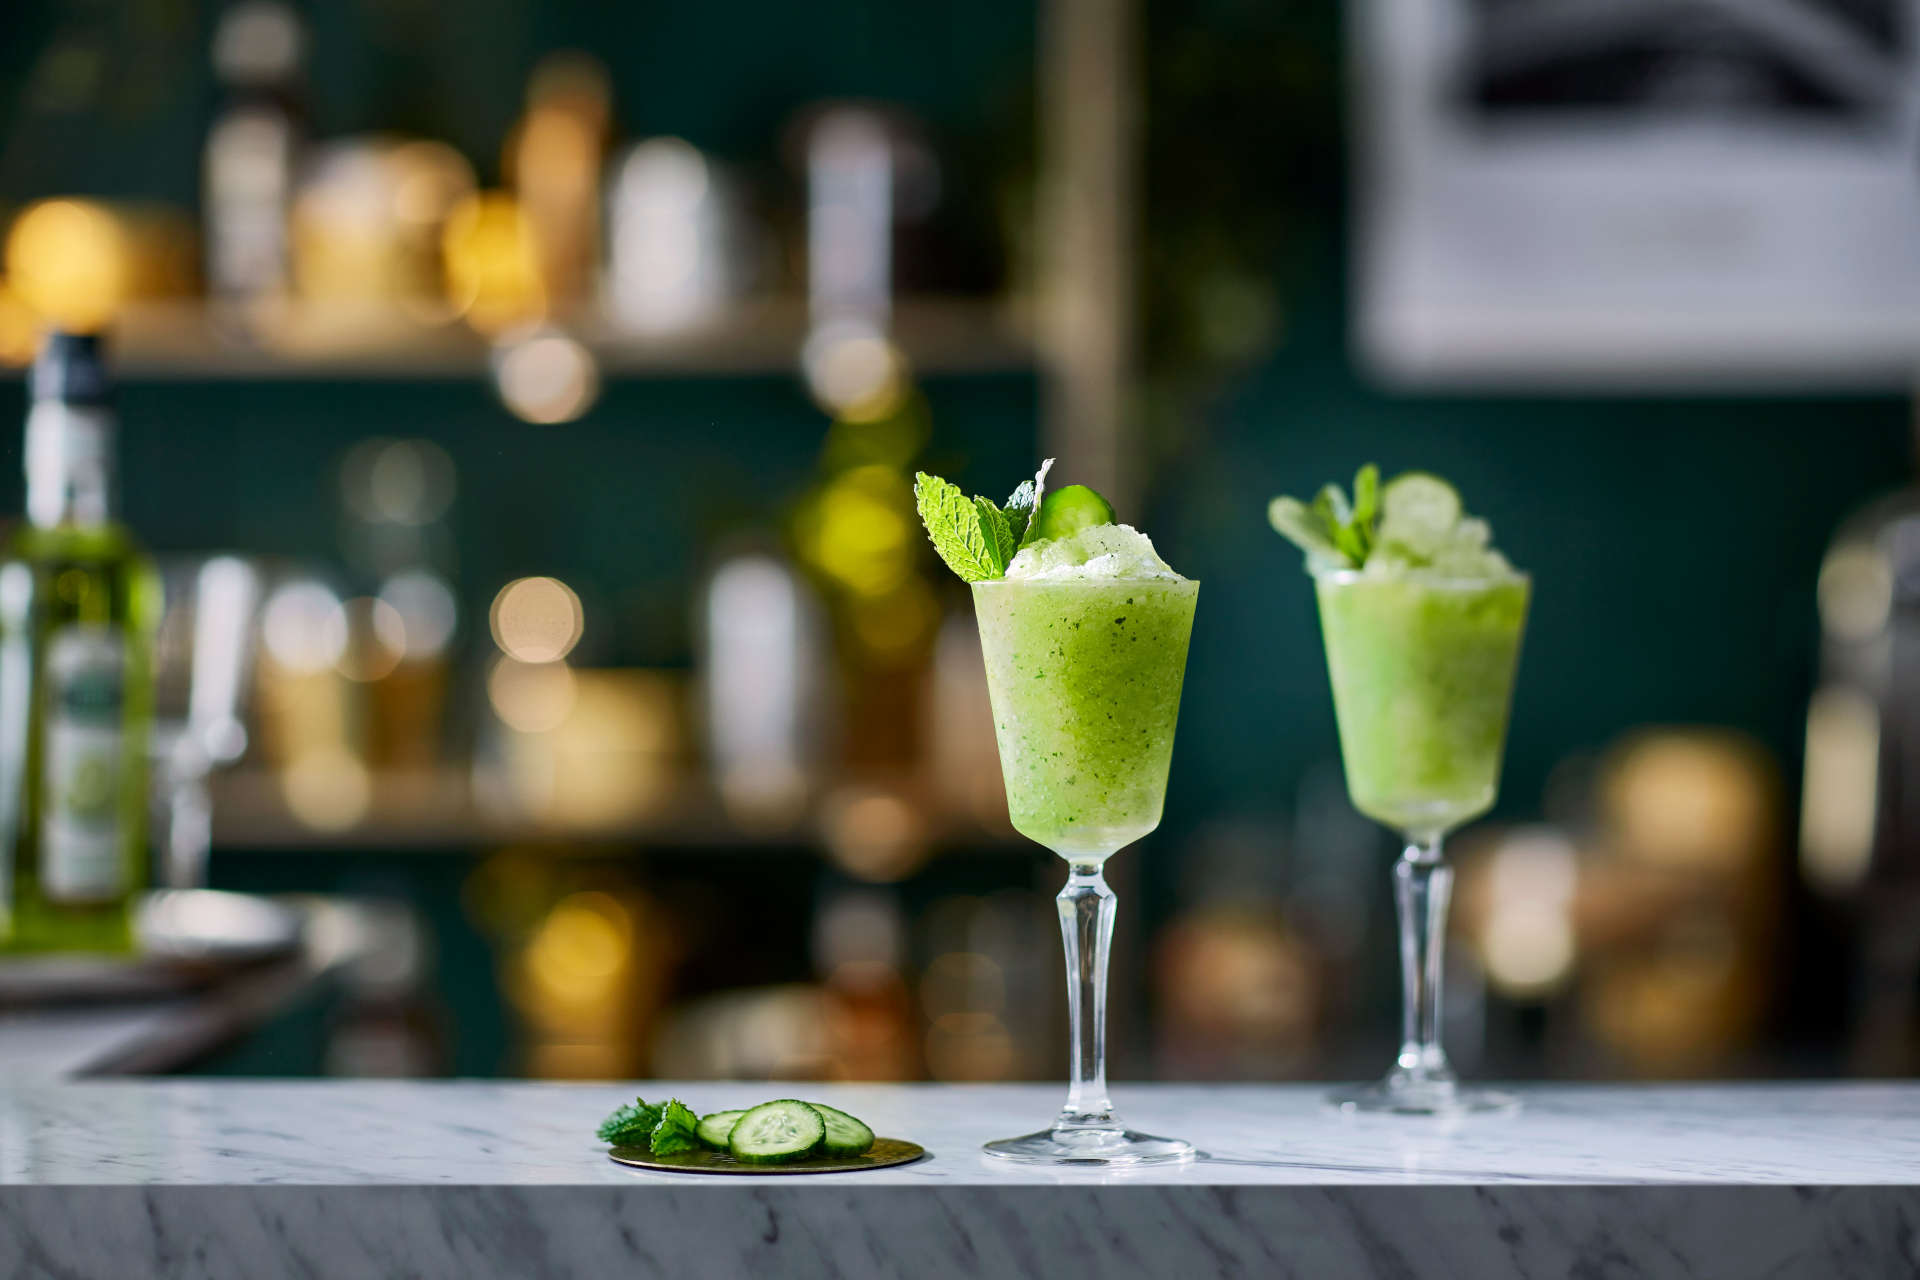 Two glasses of Sunshine Slushie on a bar with cucumber slices